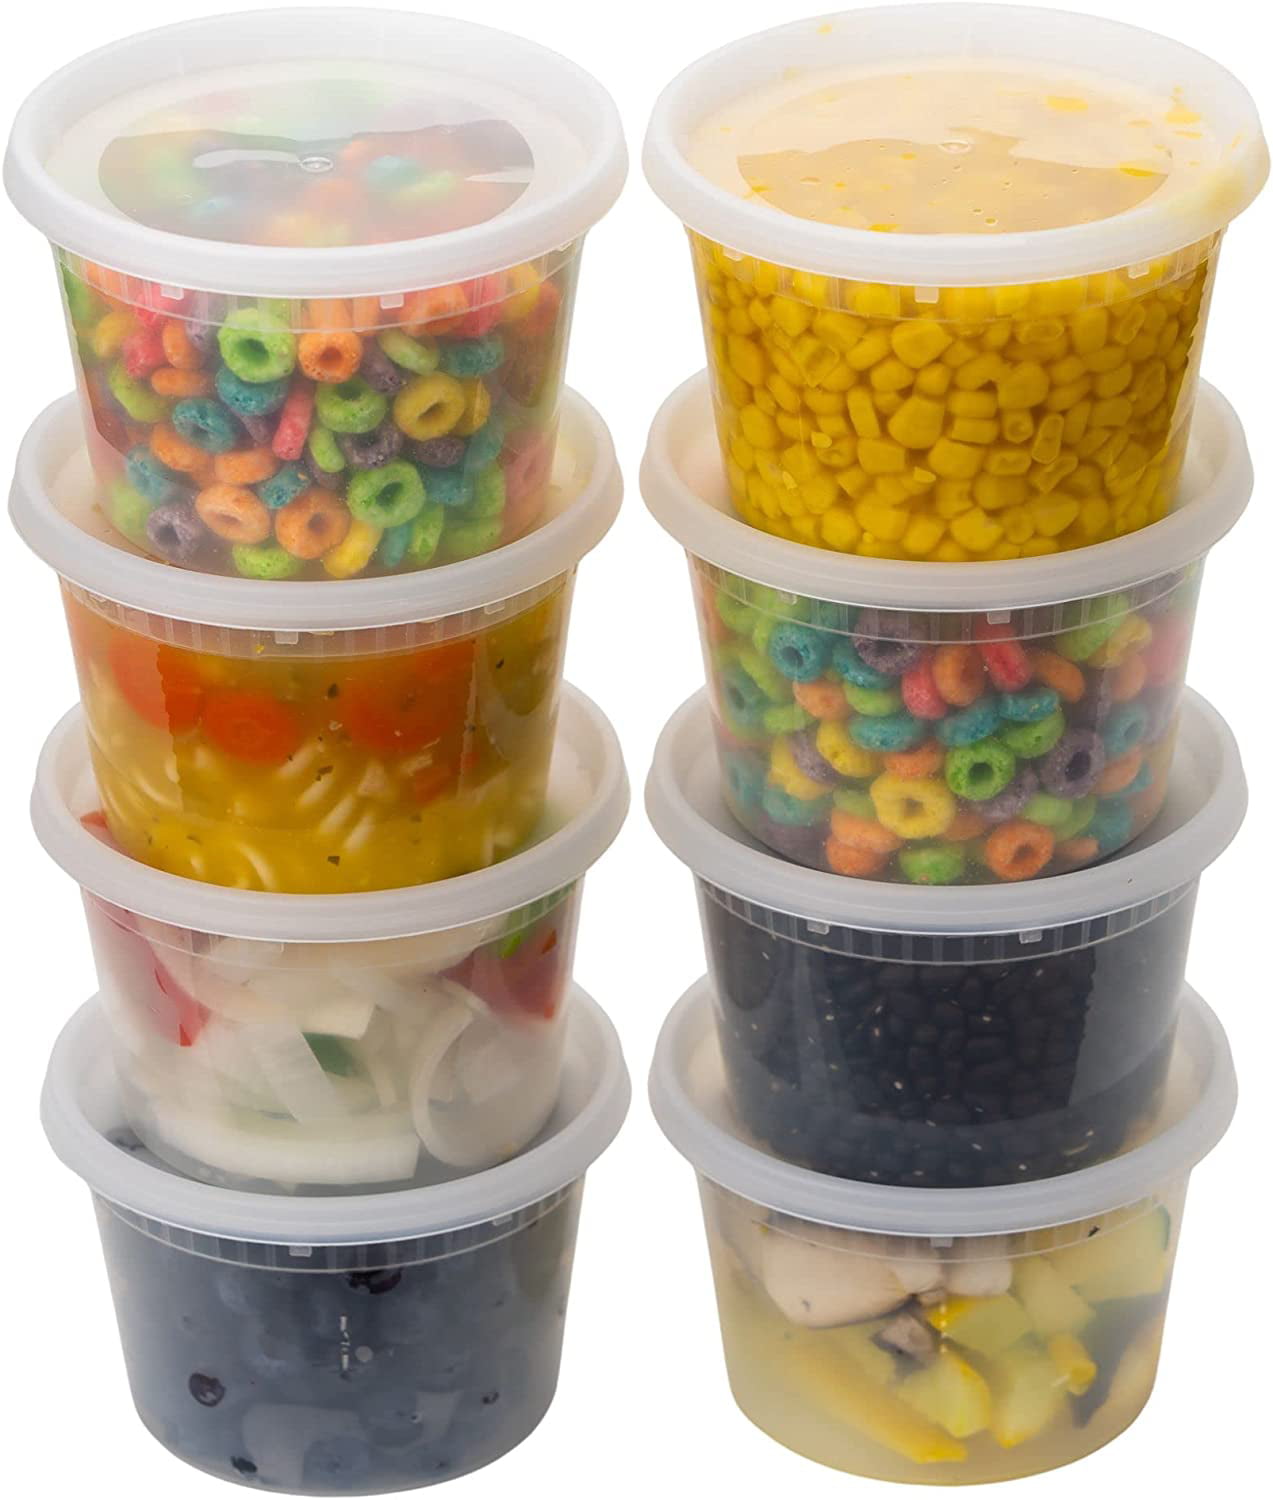 Deli Container with Lids - Food Storage - Clear Freezer, 36-Pack BPA Free  Plastic 8, 16, 32 oz, Cup Pint Quart set, Great for Soup, Meal Prep,  Portion